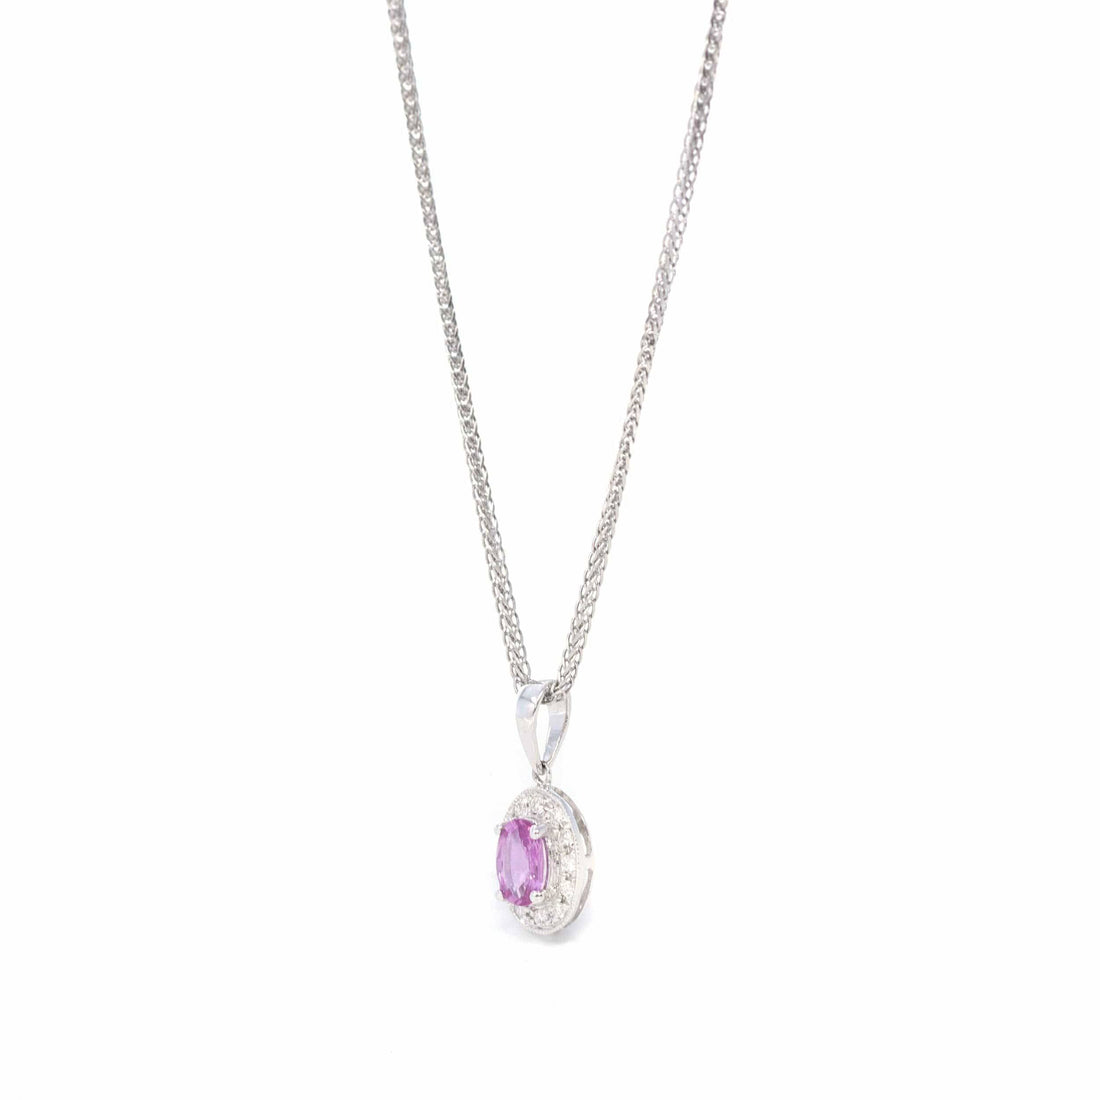 Baikalla Jewelry Gemstone Pendant Necklace 14k White Gold Natural Oval Amethyst Necklace With Diamond Halo